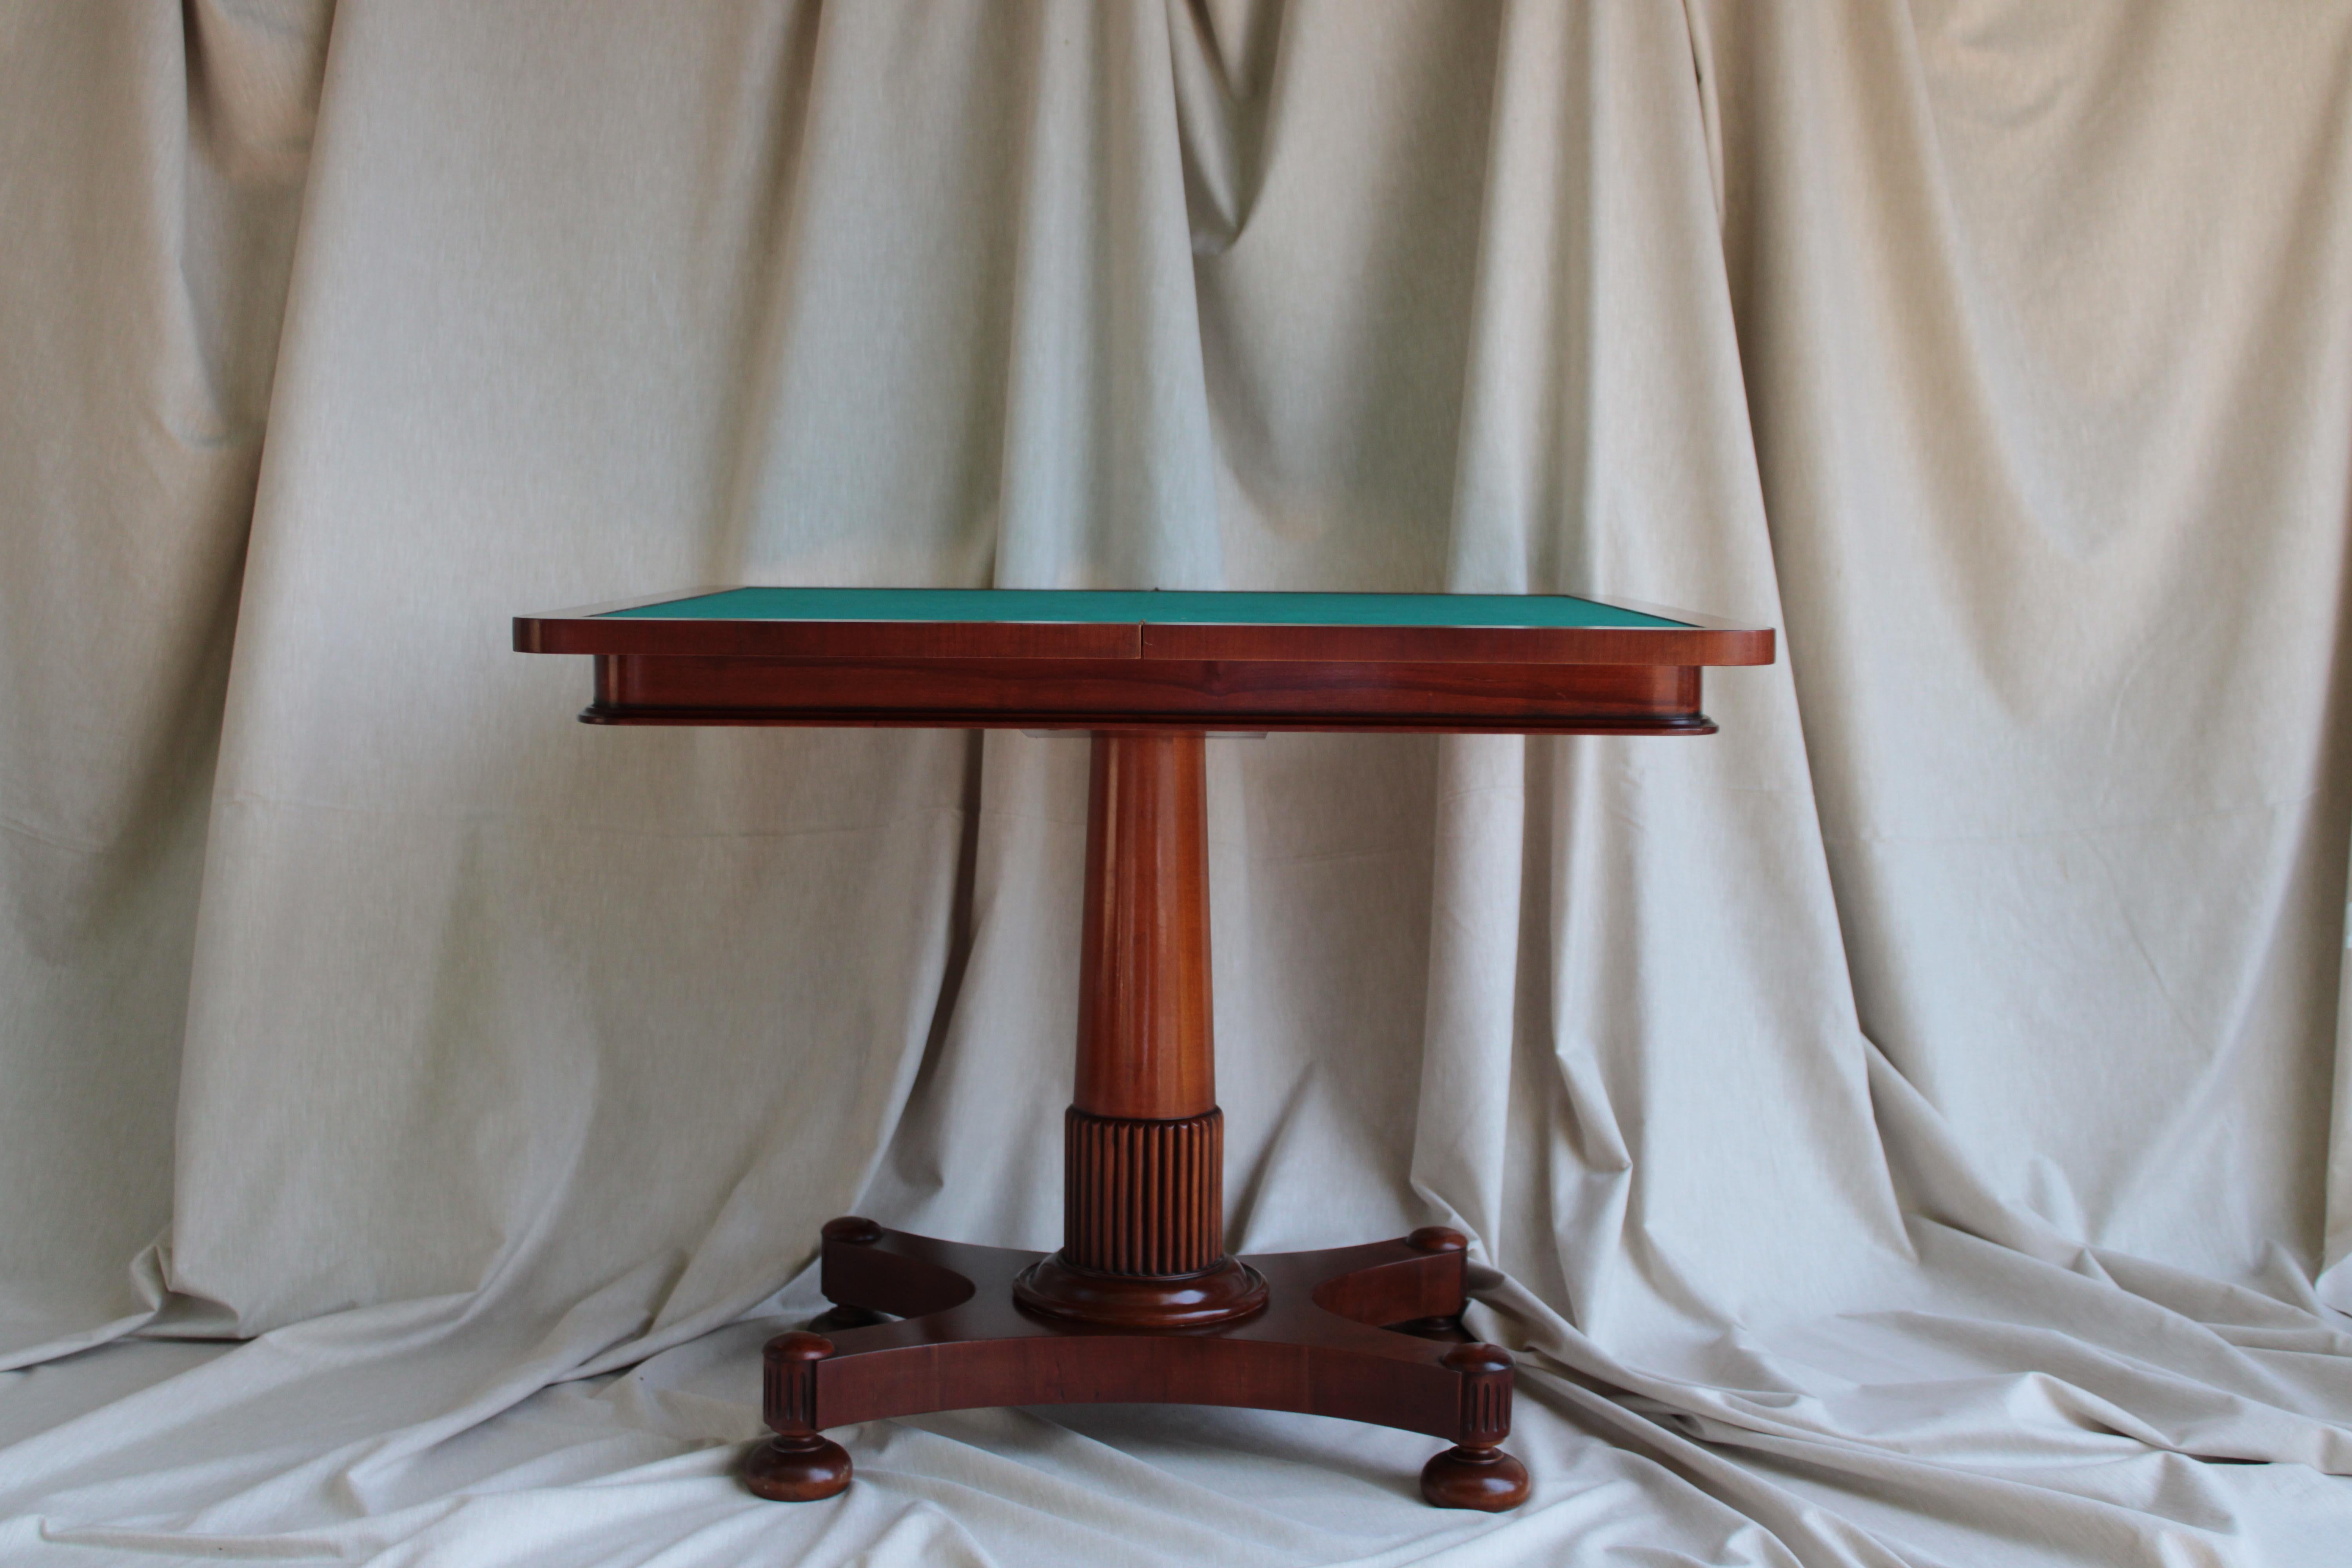 Mahogany game table from Portugal dated back to 1930s.

Portugal has a long history of fine craftsmanship, and during the 1930s, furniture styles in the country often incorporated elements of Art Deco and traditional Portuguese designs.
The use